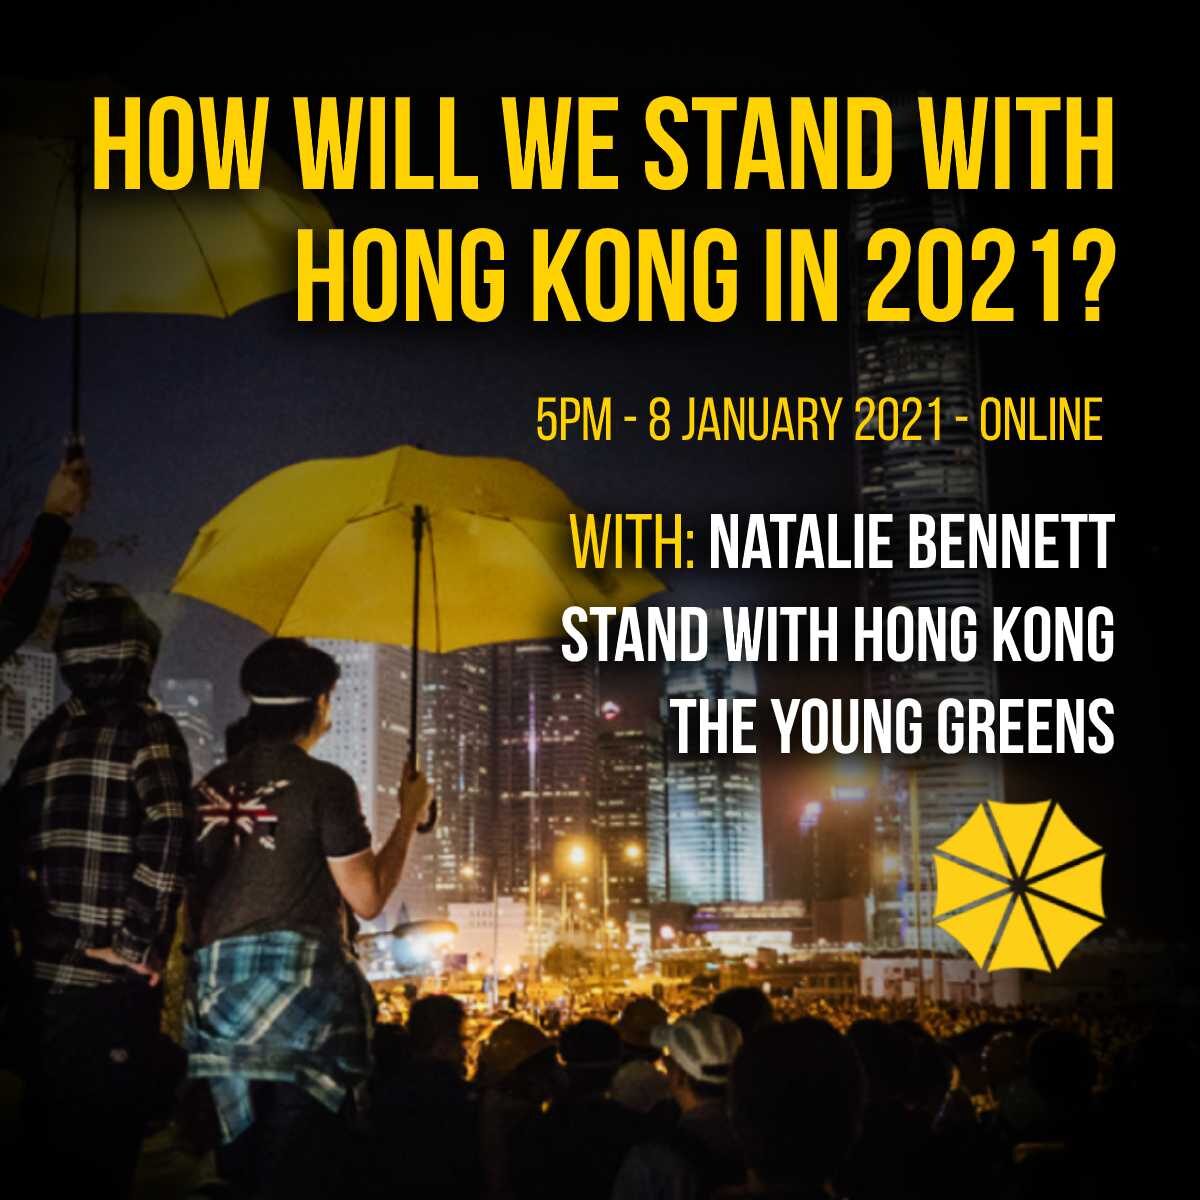 How will we stand with Hong Kong in 2021? Image of protestors in HK with yellow umbrellas